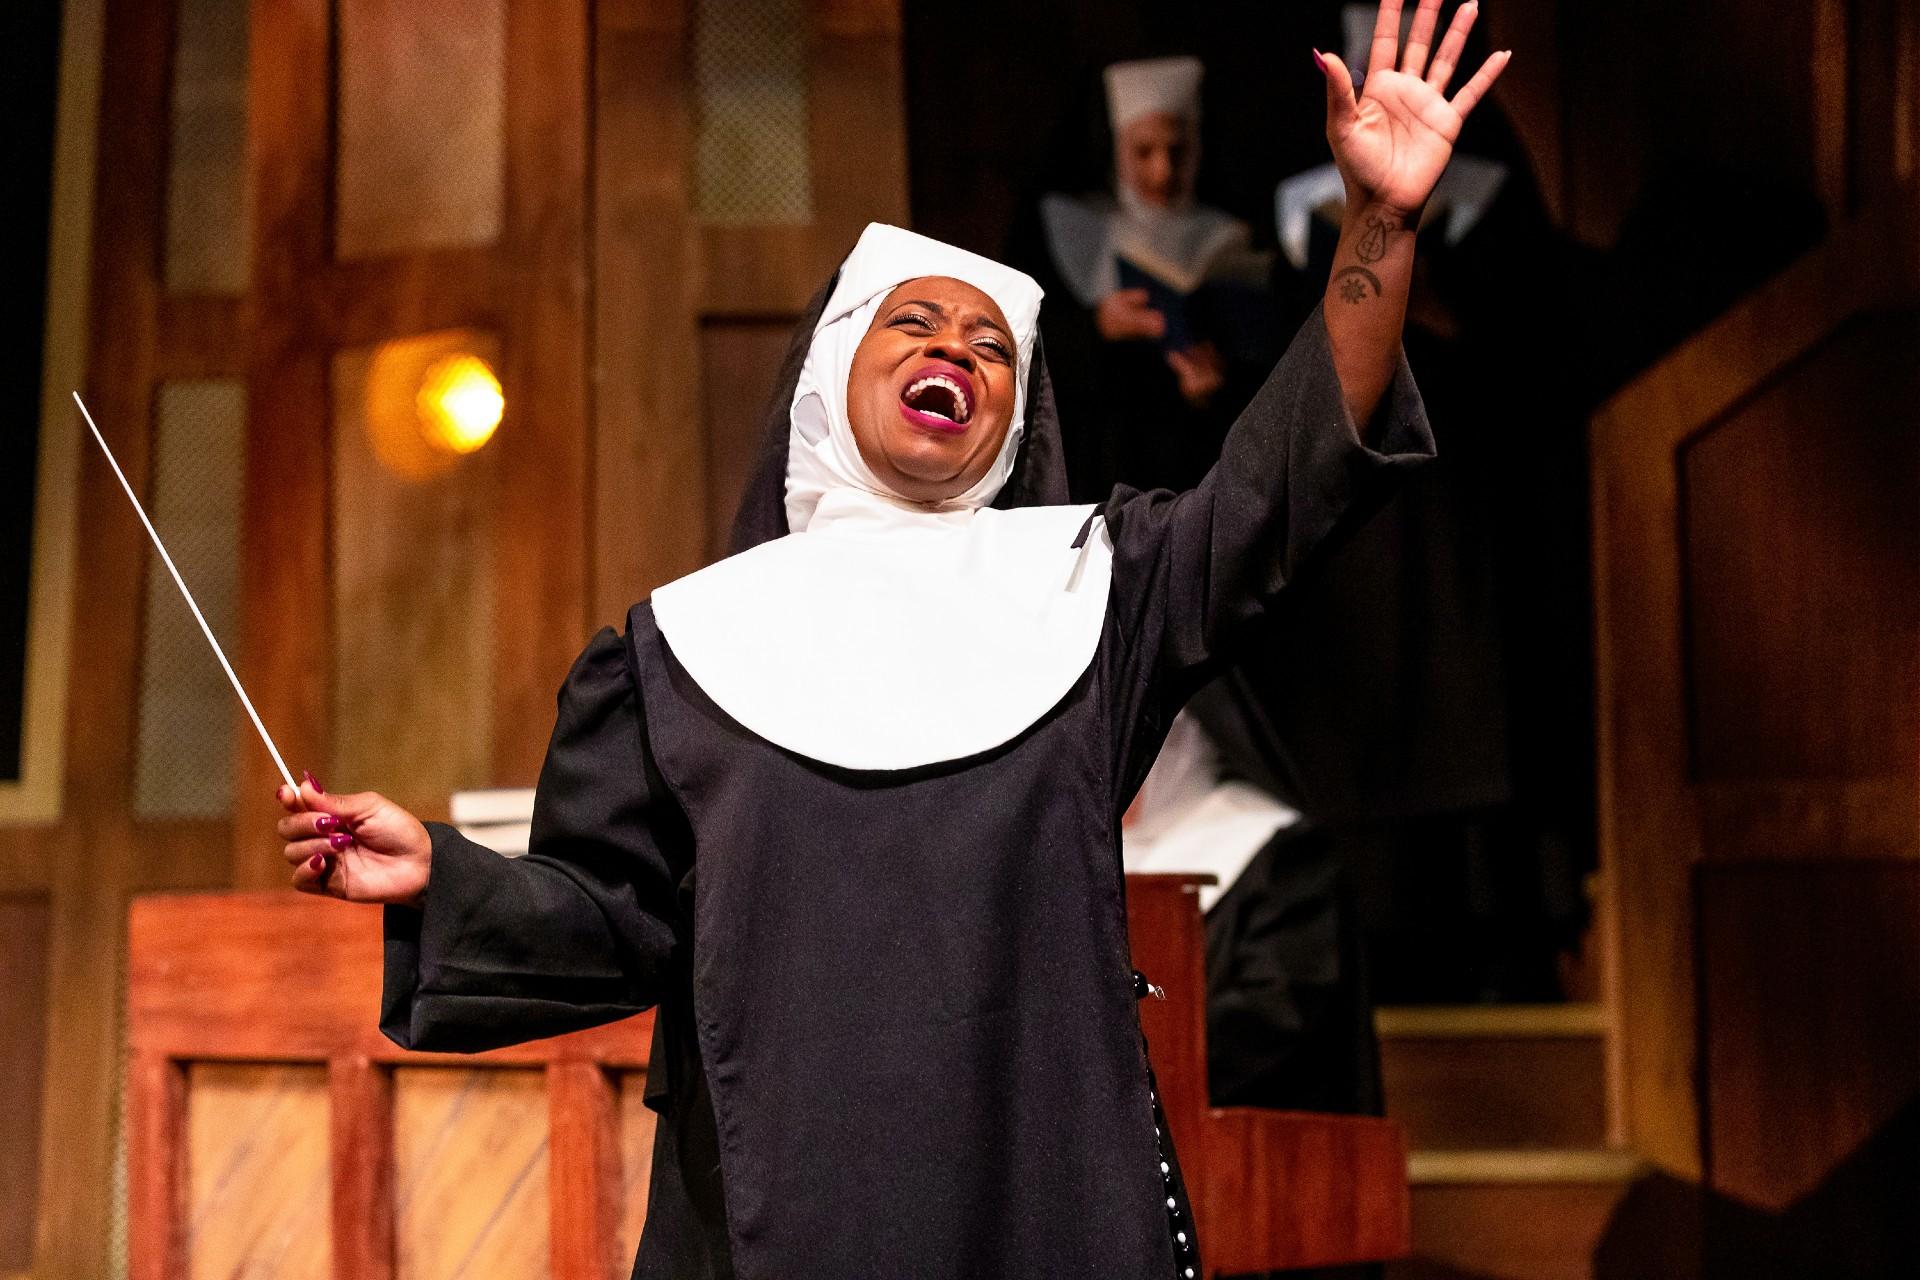 Alexis J. Roston performs in “Sister Act.” (Credit: Brett Beiner Photography)